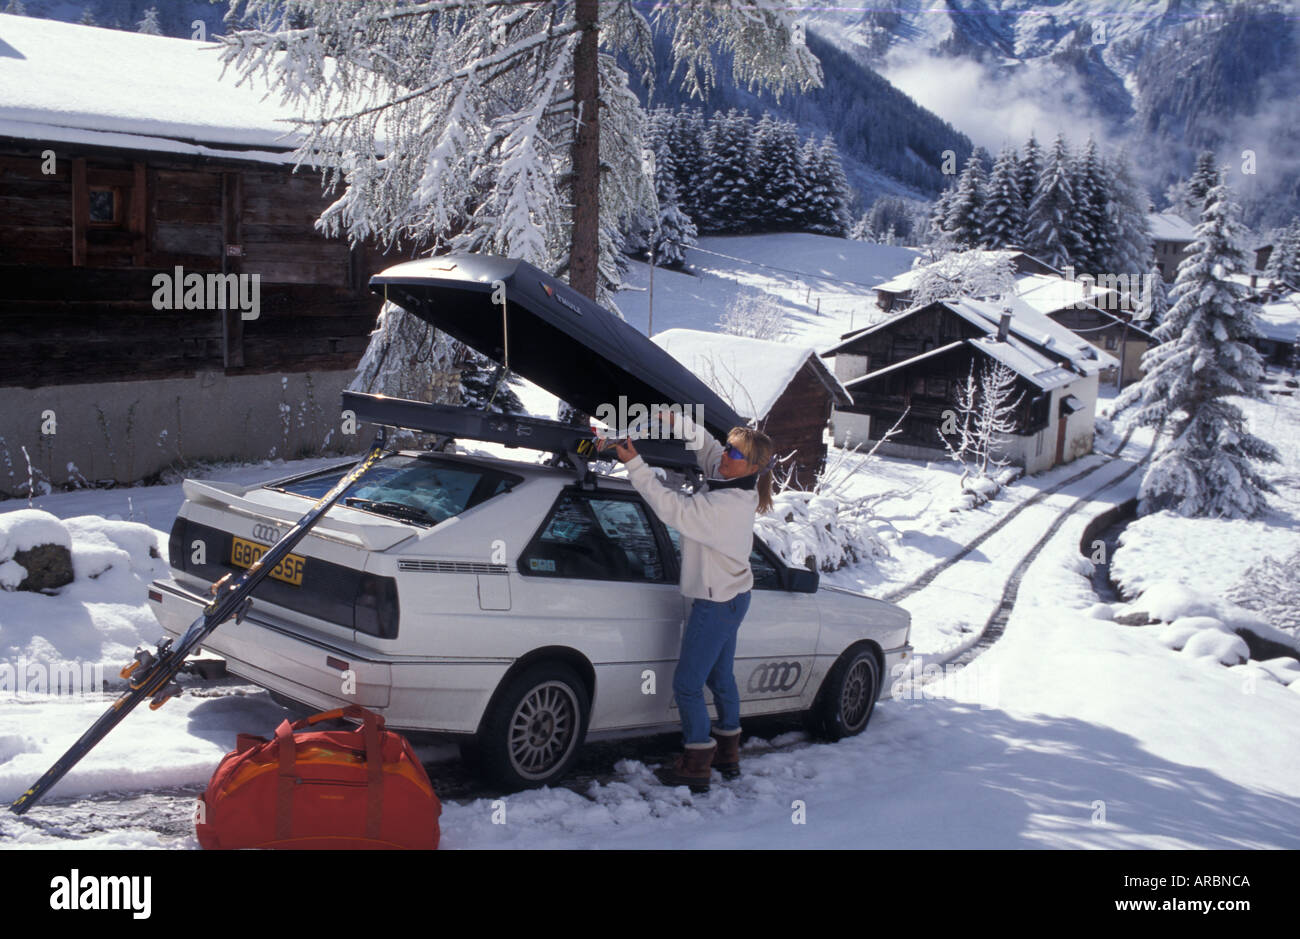 Woman Unloading The Ski Box On Top Of A Car In A Ski Resort Stock Photo Alamy